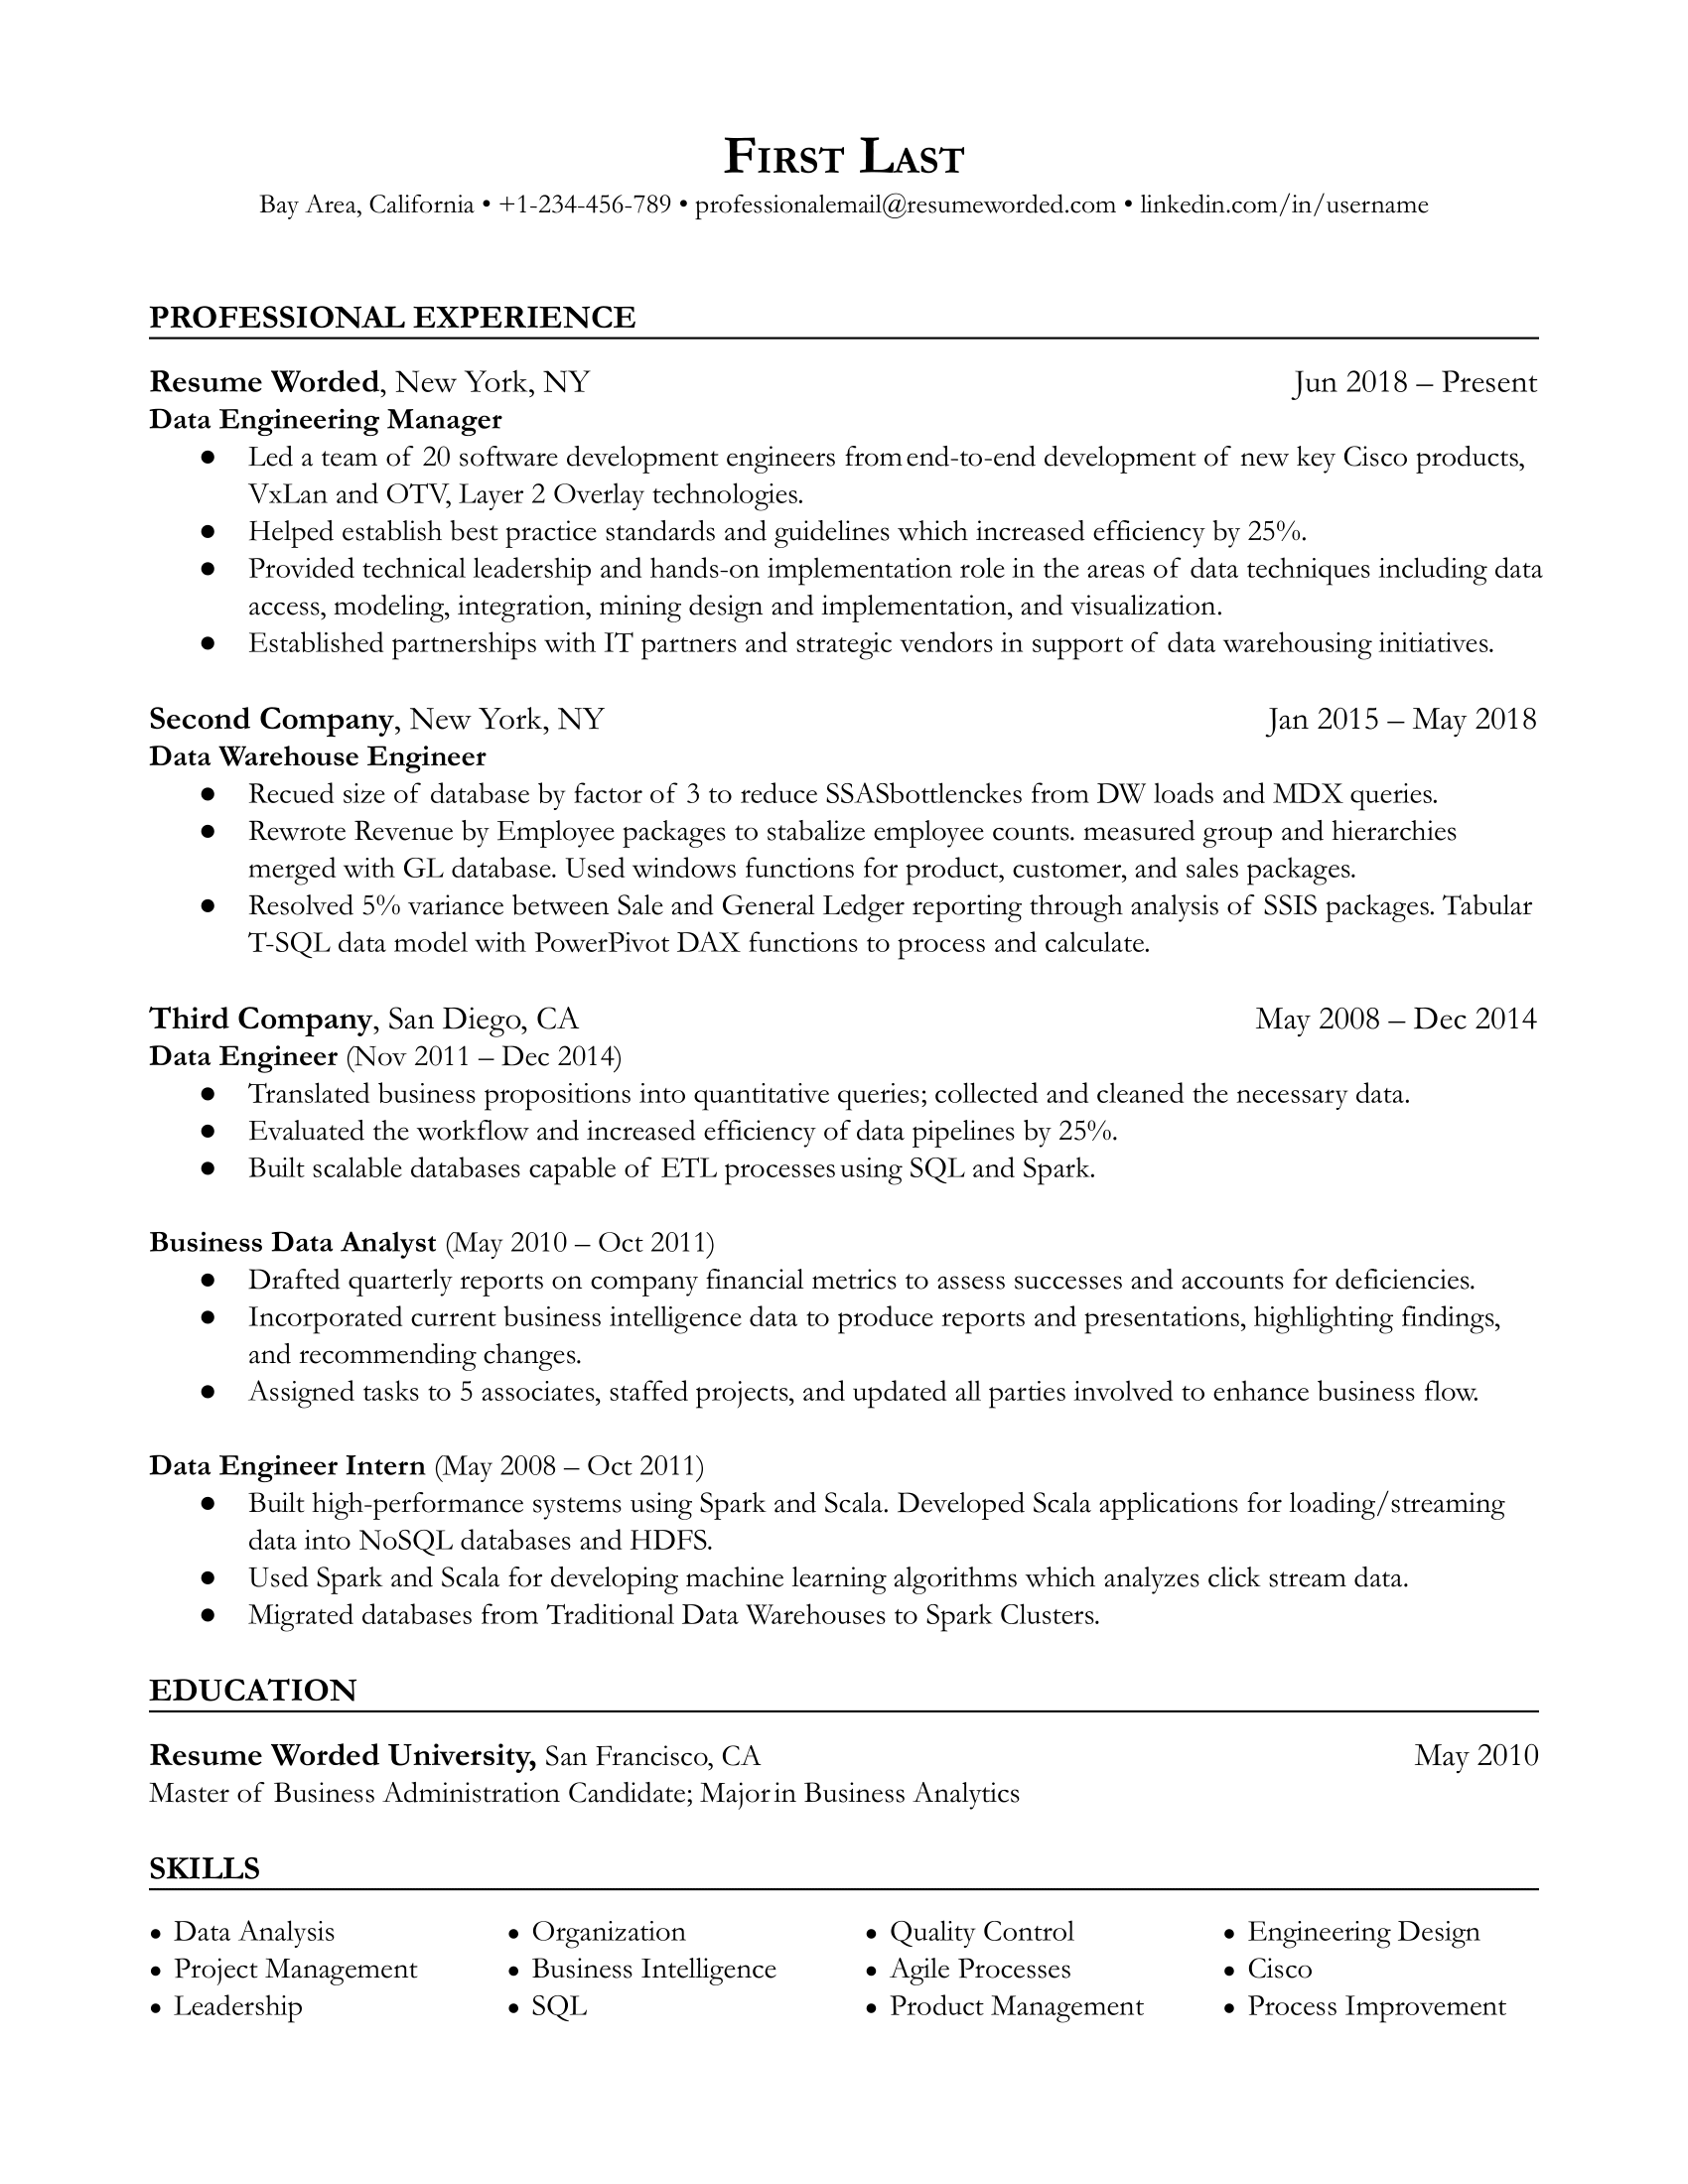 A CV for a Data Engineering Manager showcasing leadership skills and technical proficiency.